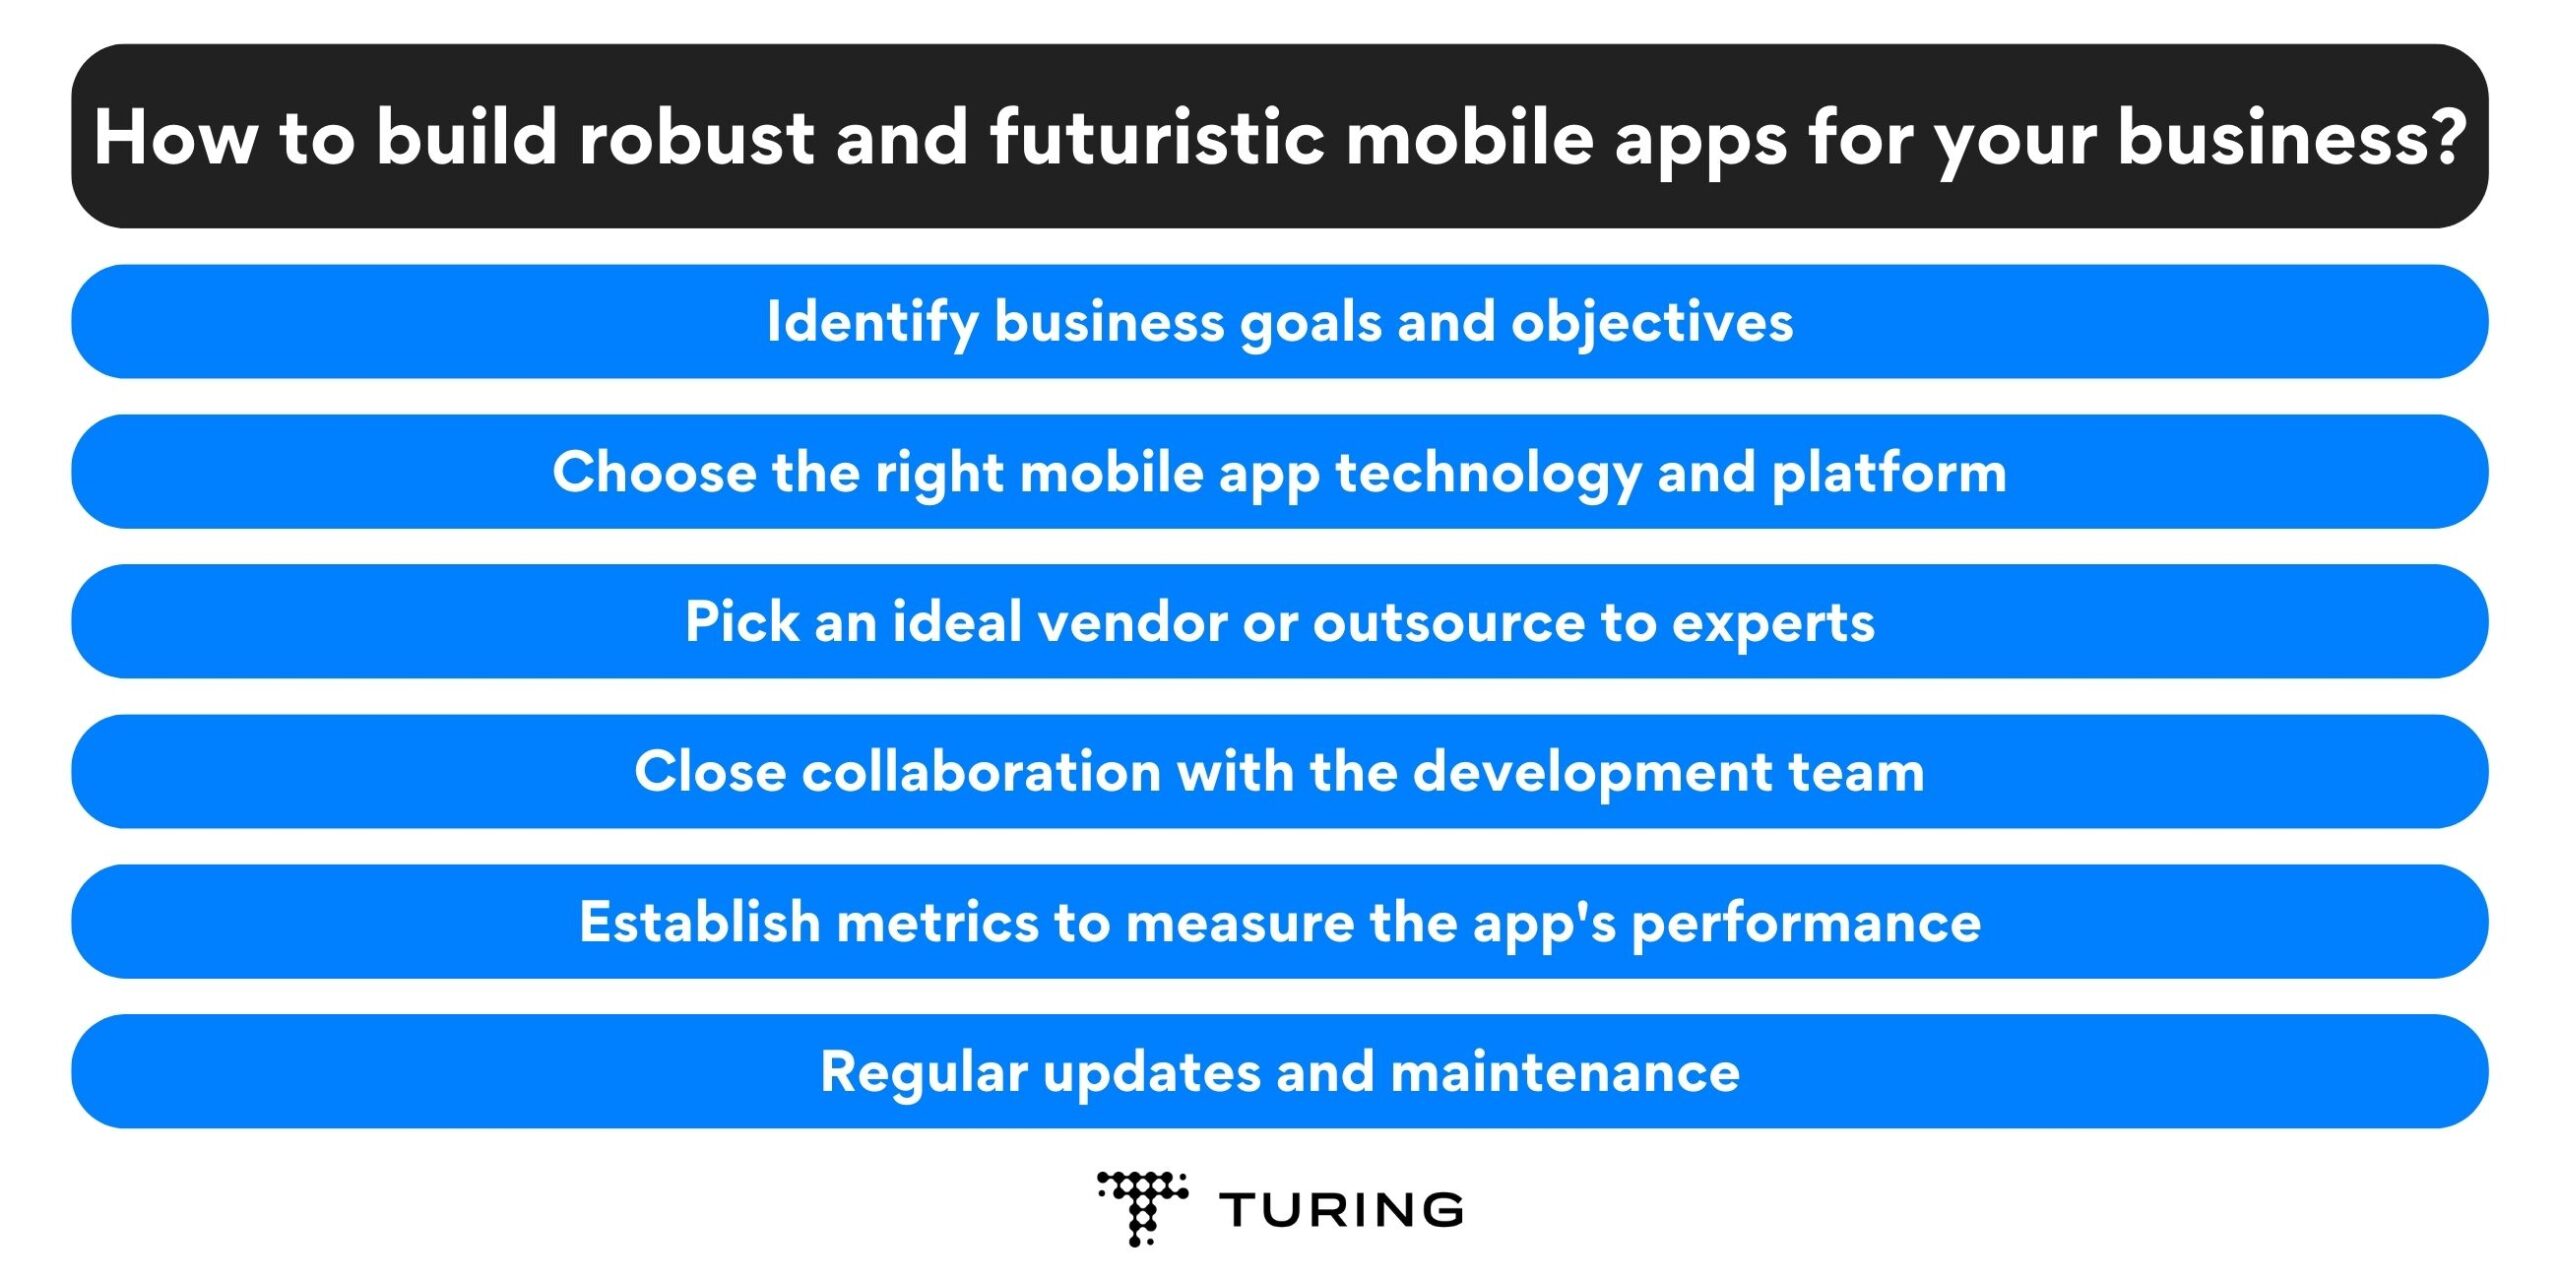 How to build robust and futuristic mobile apps for your business